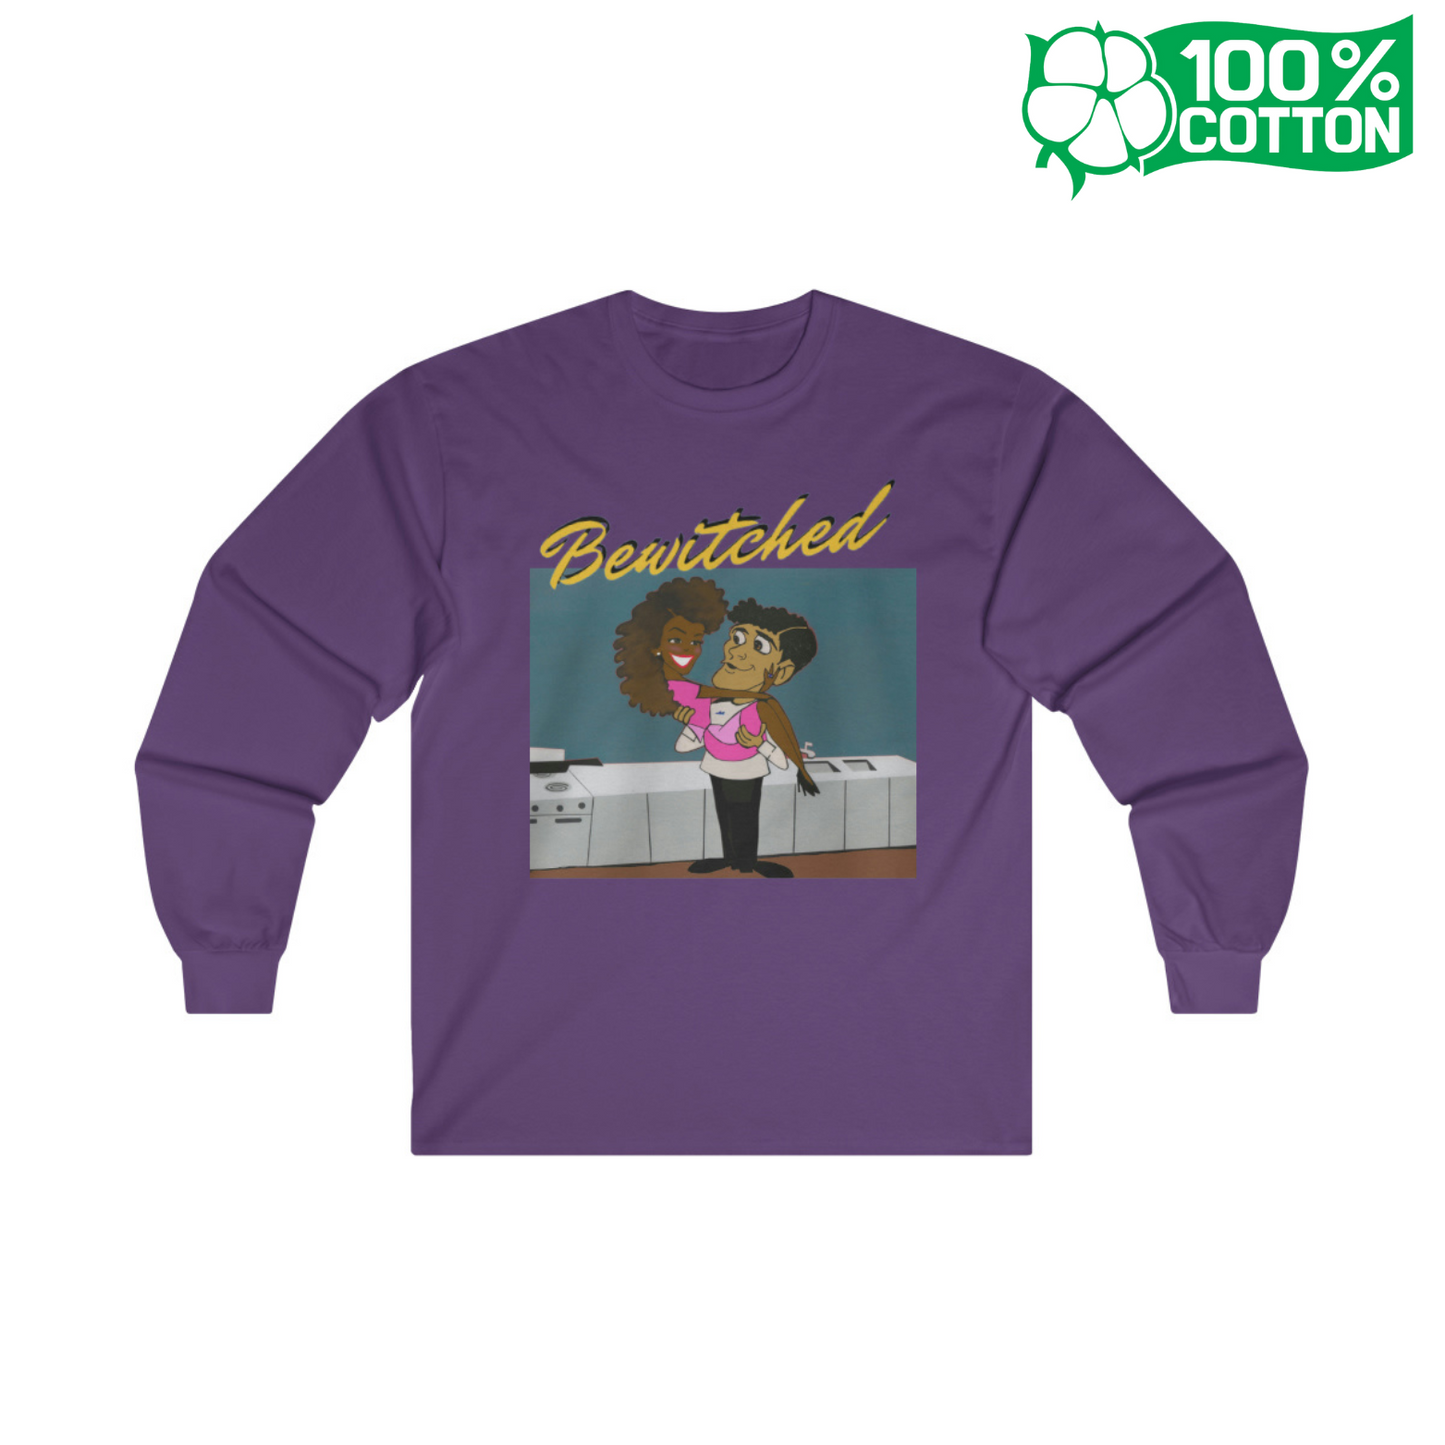 Bewitched x Black Girl Magic- Unisex Long Sleeve Tee